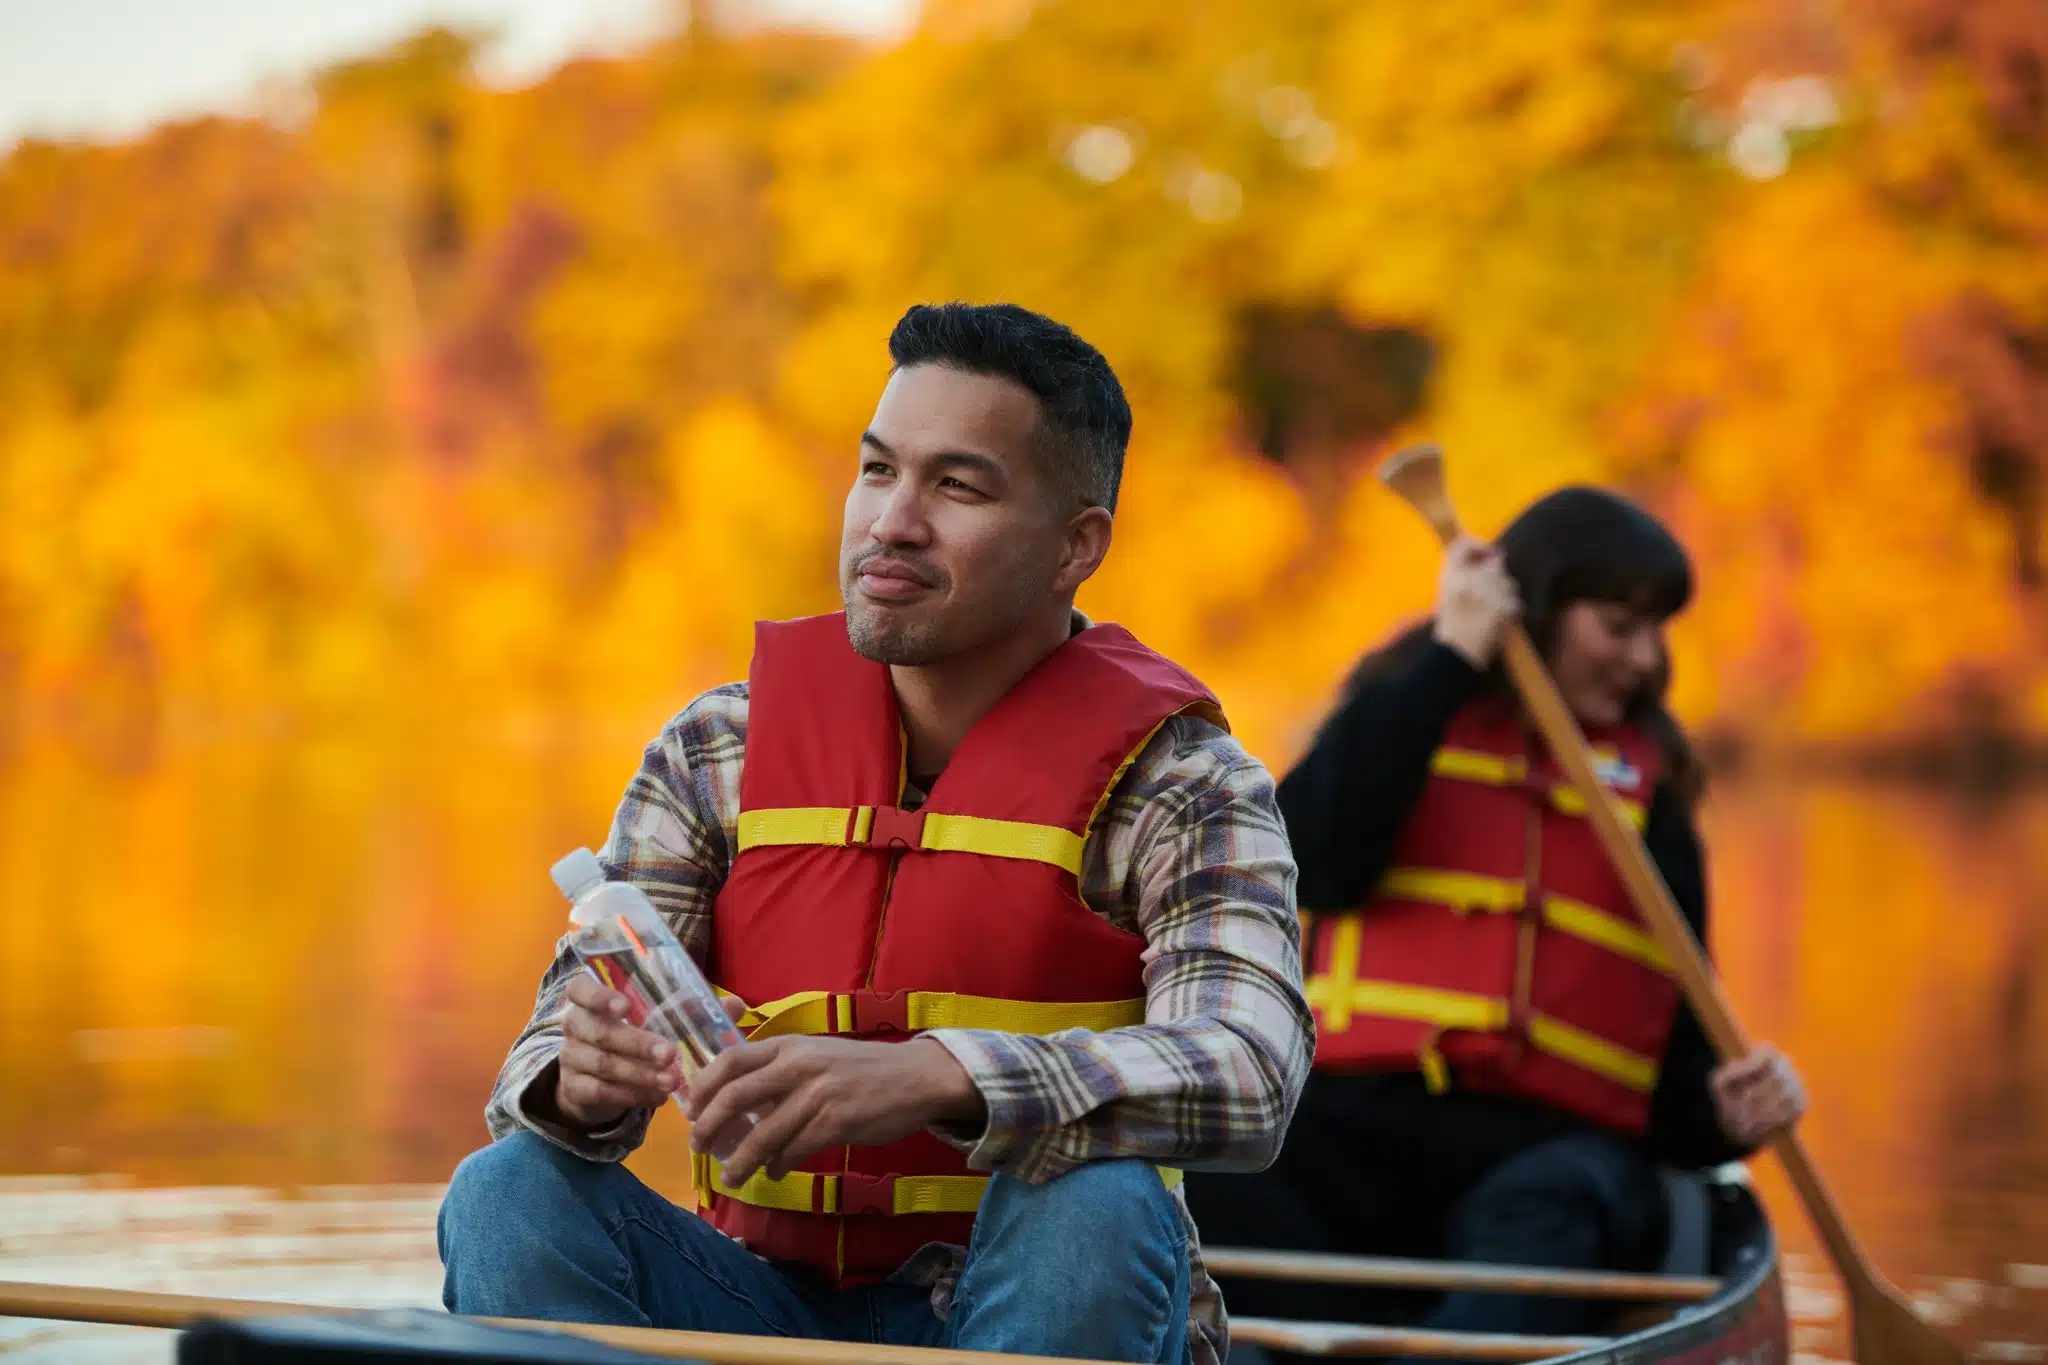 Canoeing with the autumn leaves as the backdrop